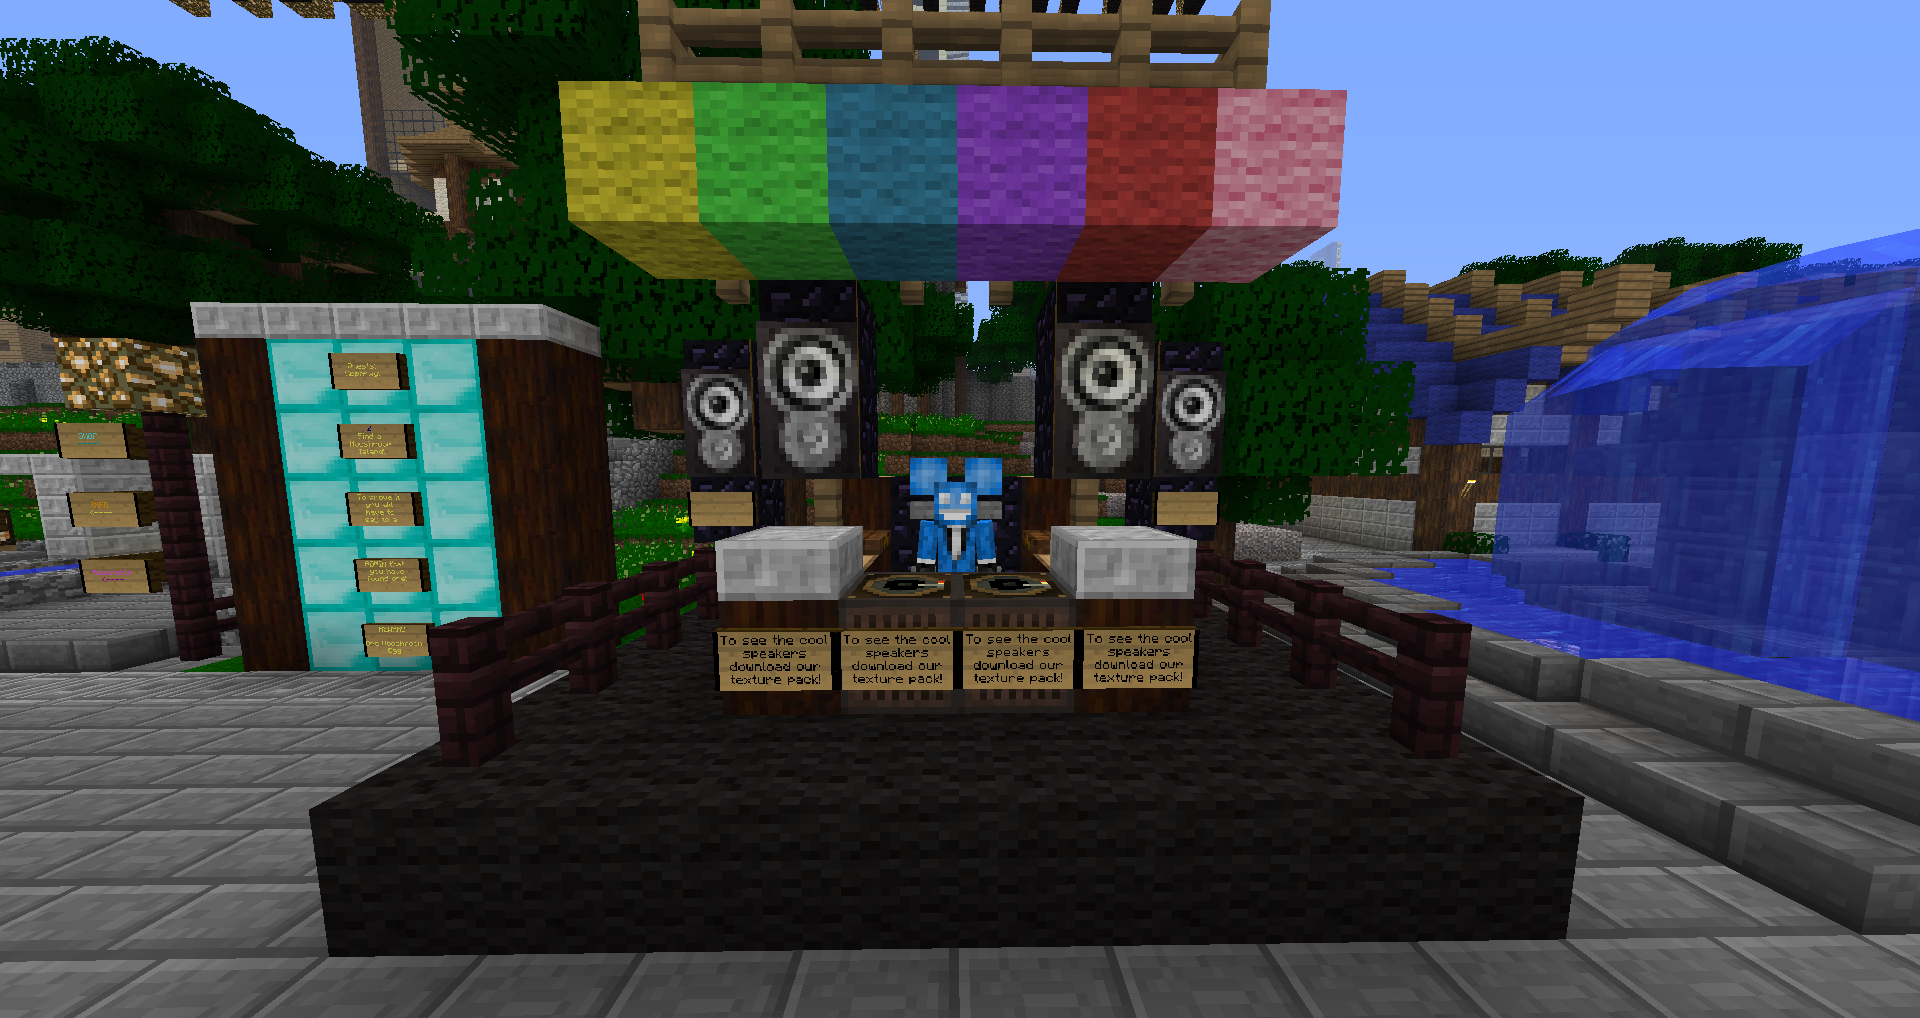 Picture showing a DJ performing from the minecraft server MuCraft 2012